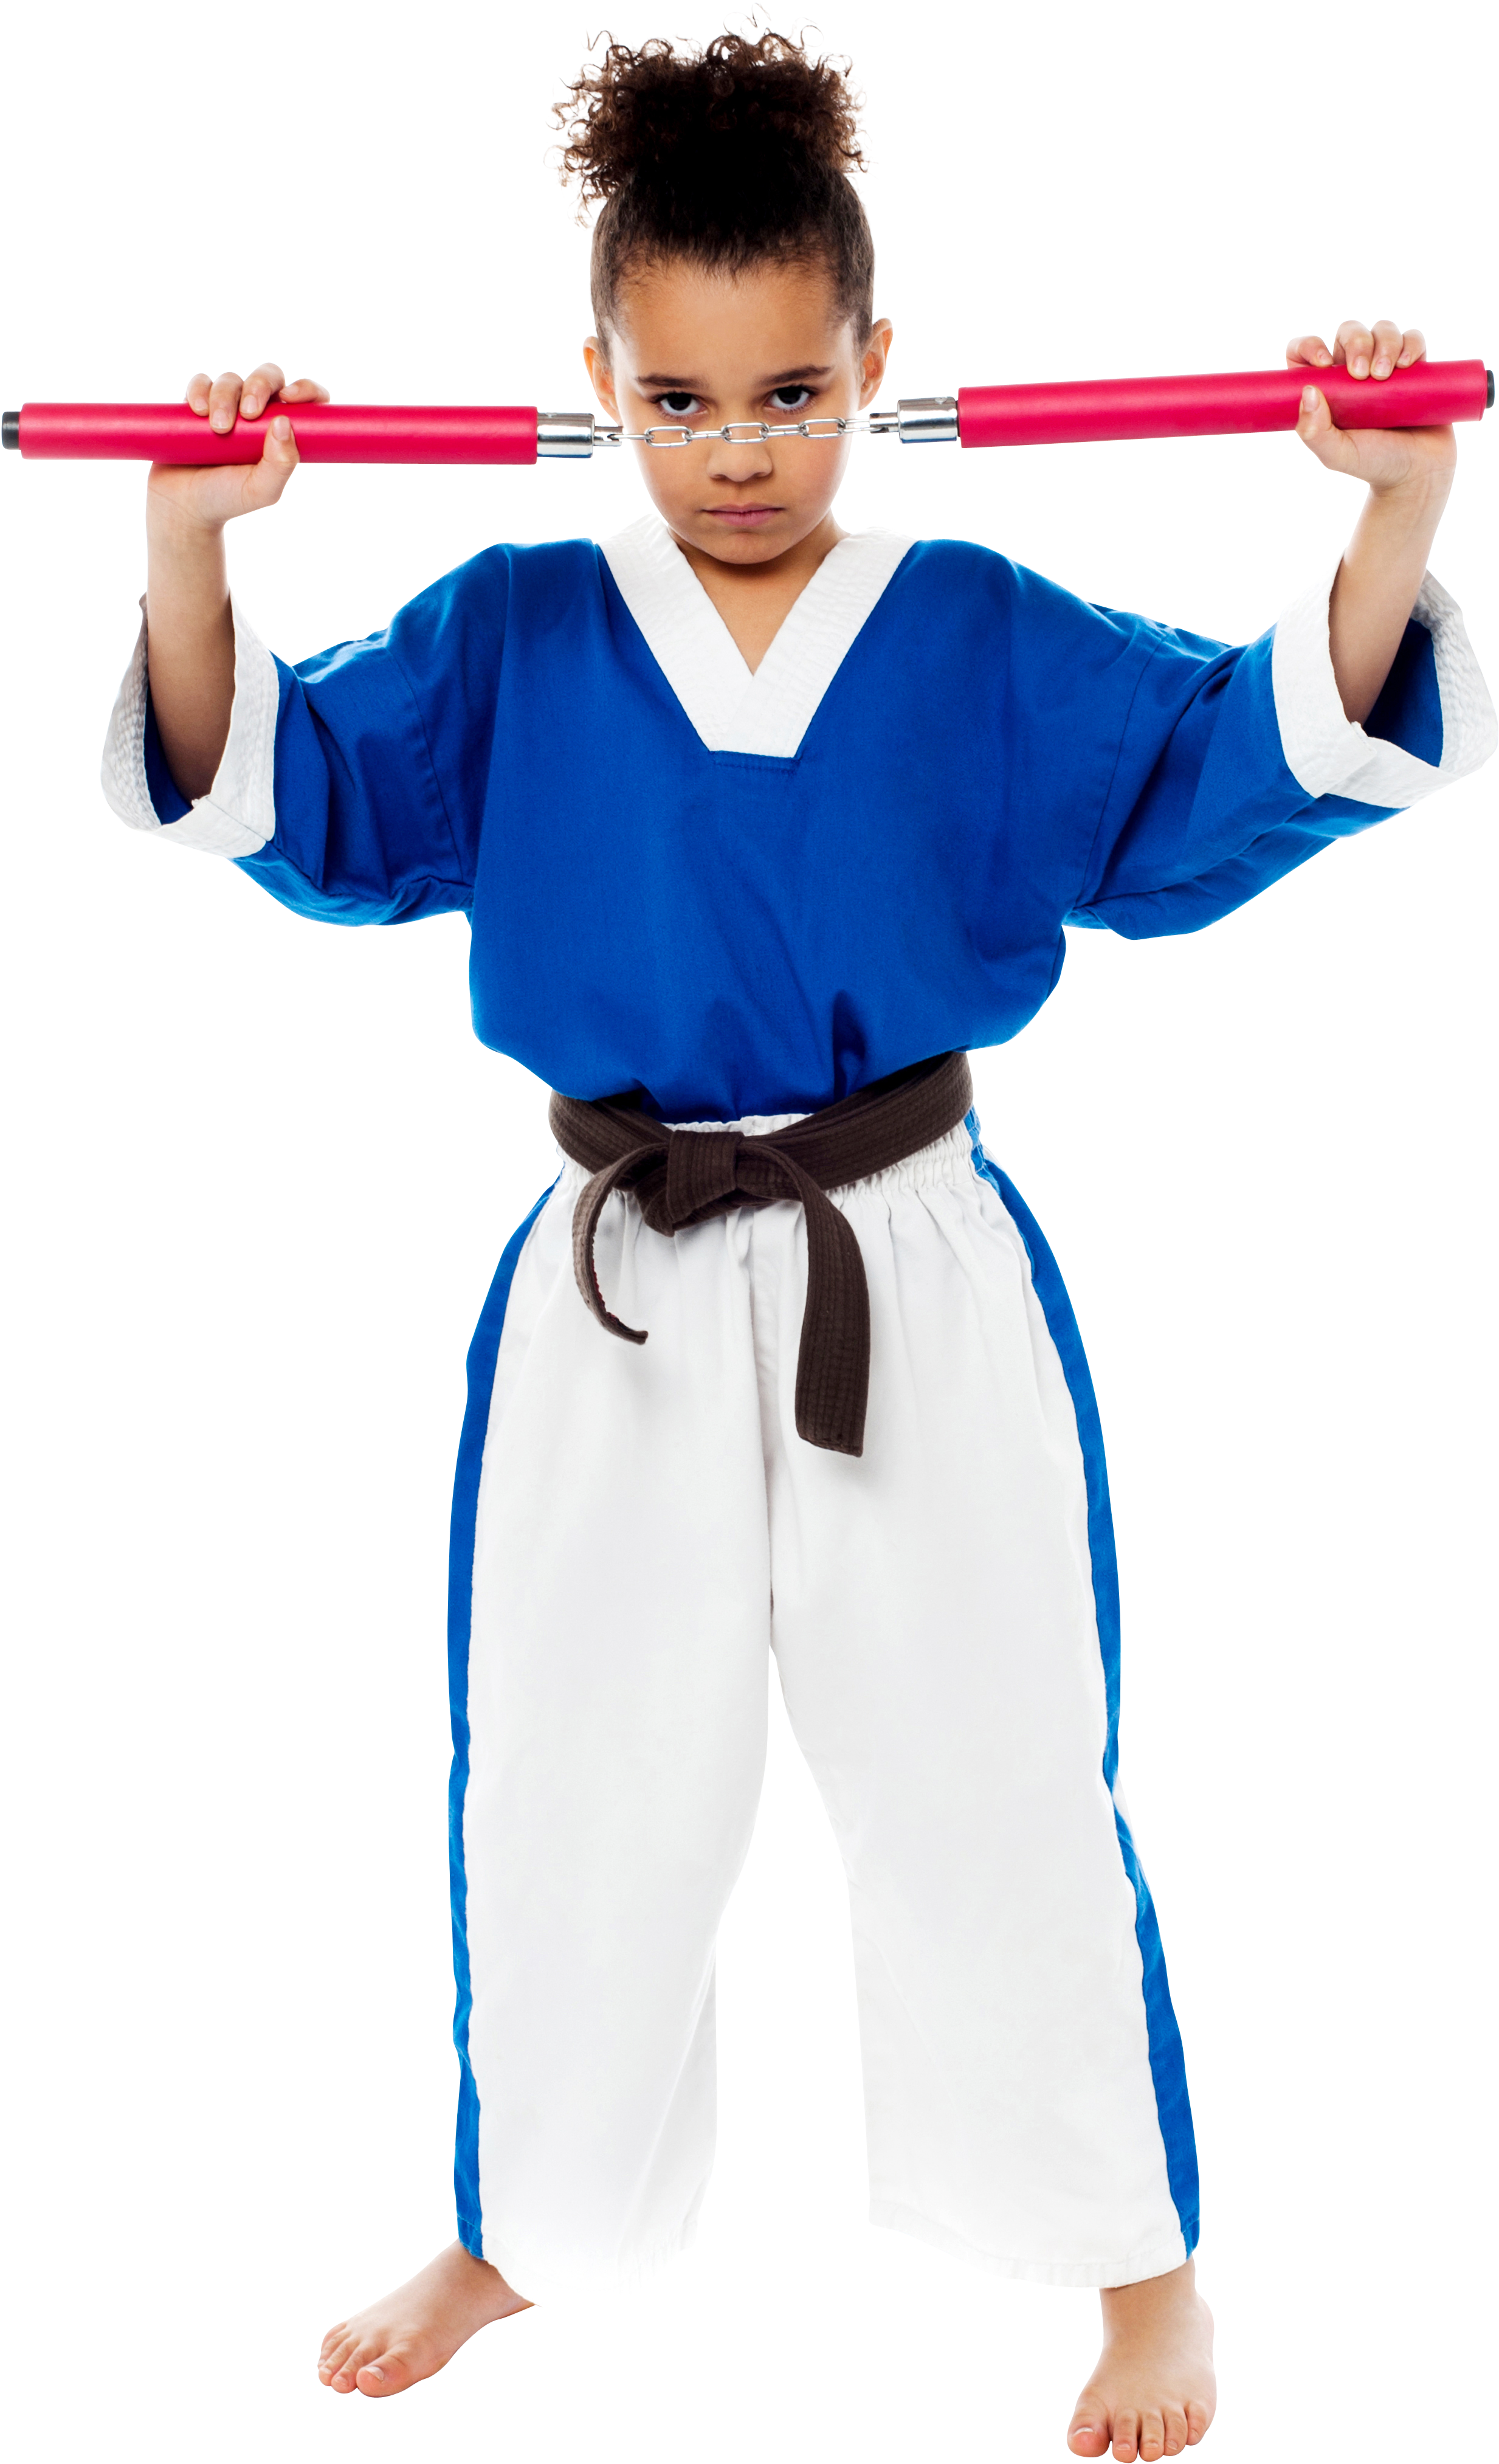 A Boy In A Blue And White Karate Uniform